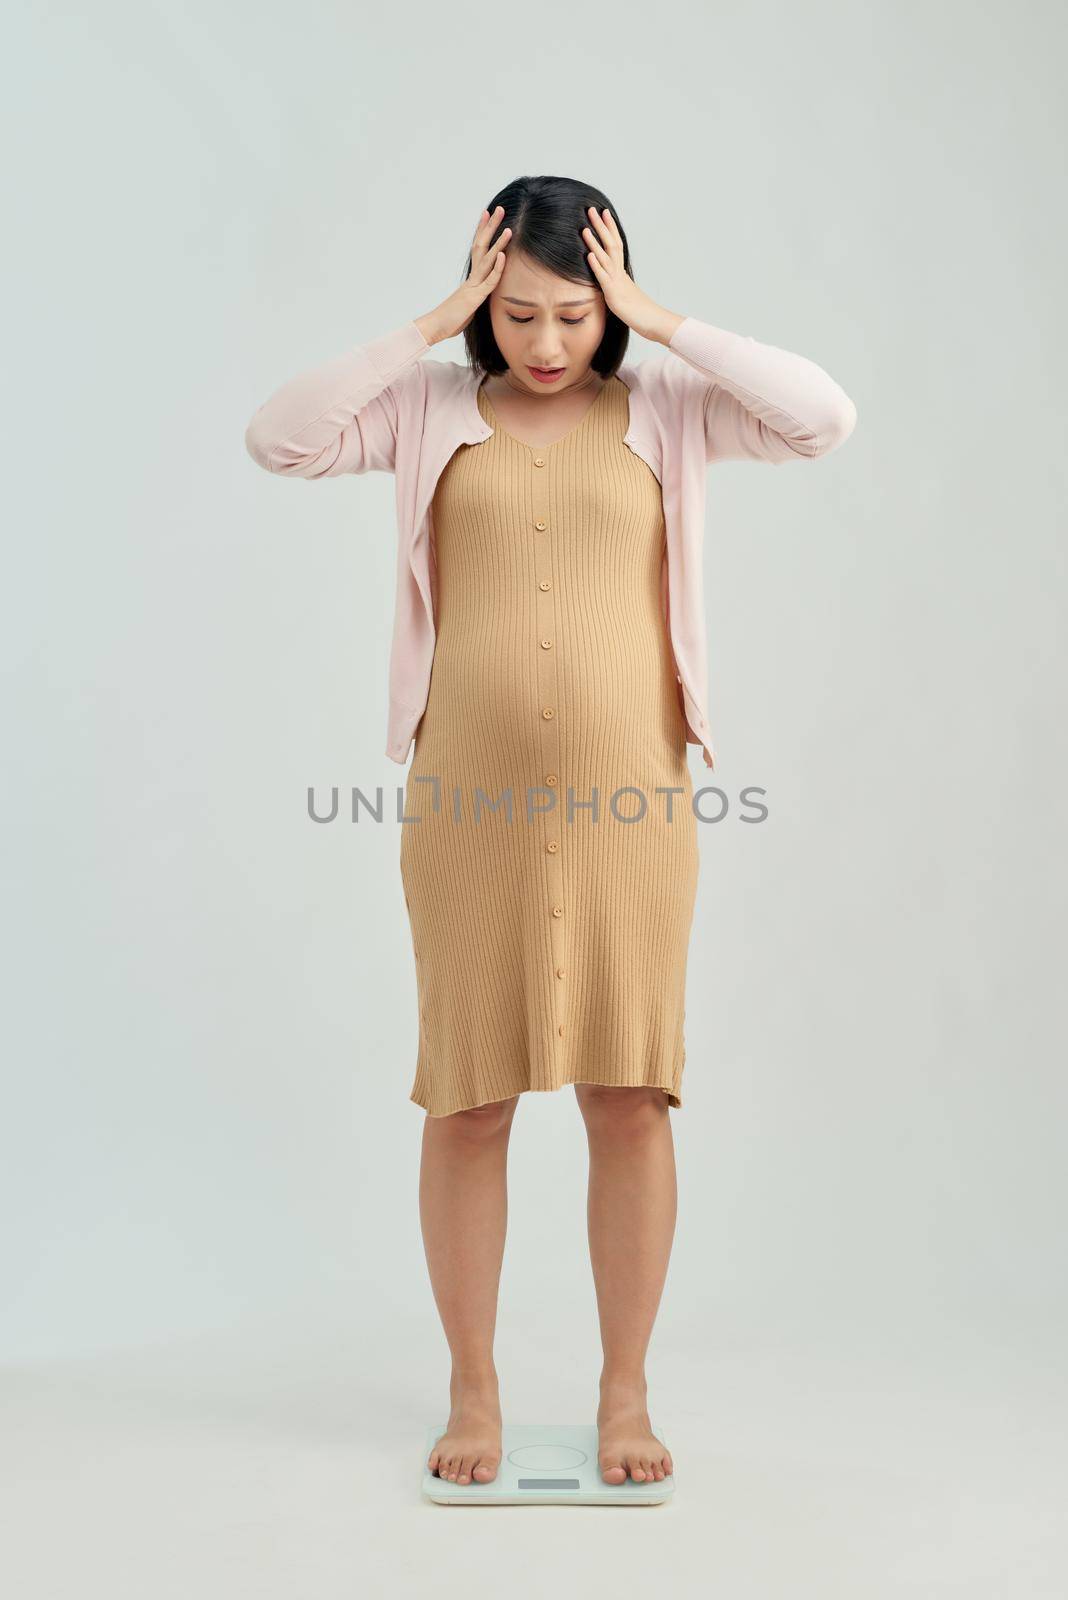 pregnant woman standing on a weight scale 